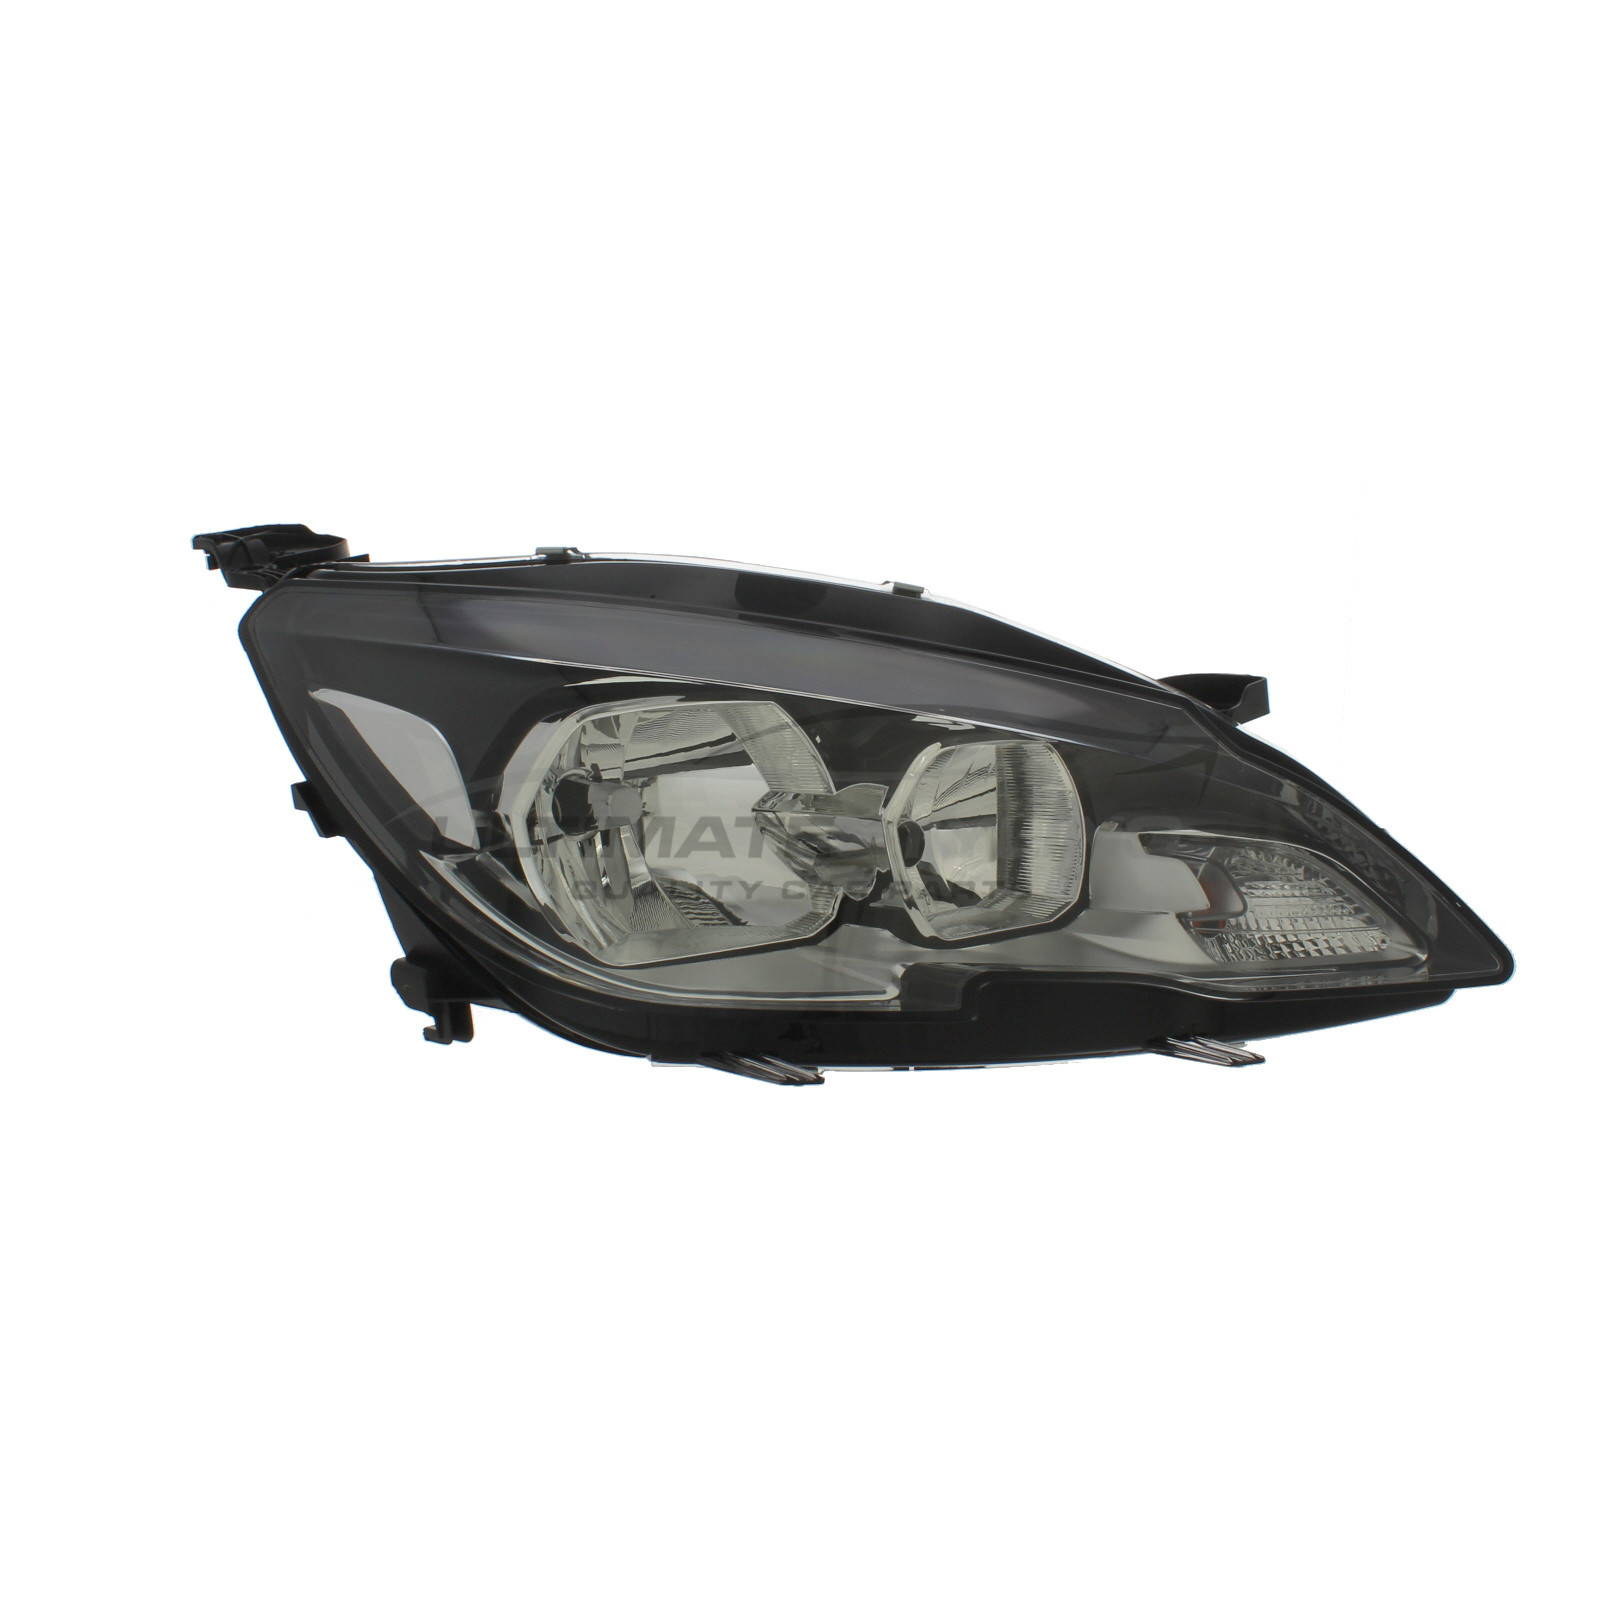 Peugeot 308 2013-2017 Halogen, Electric With Motor, Chrome Headlight / Headlamp with Black Surround Drivers Side (RH)